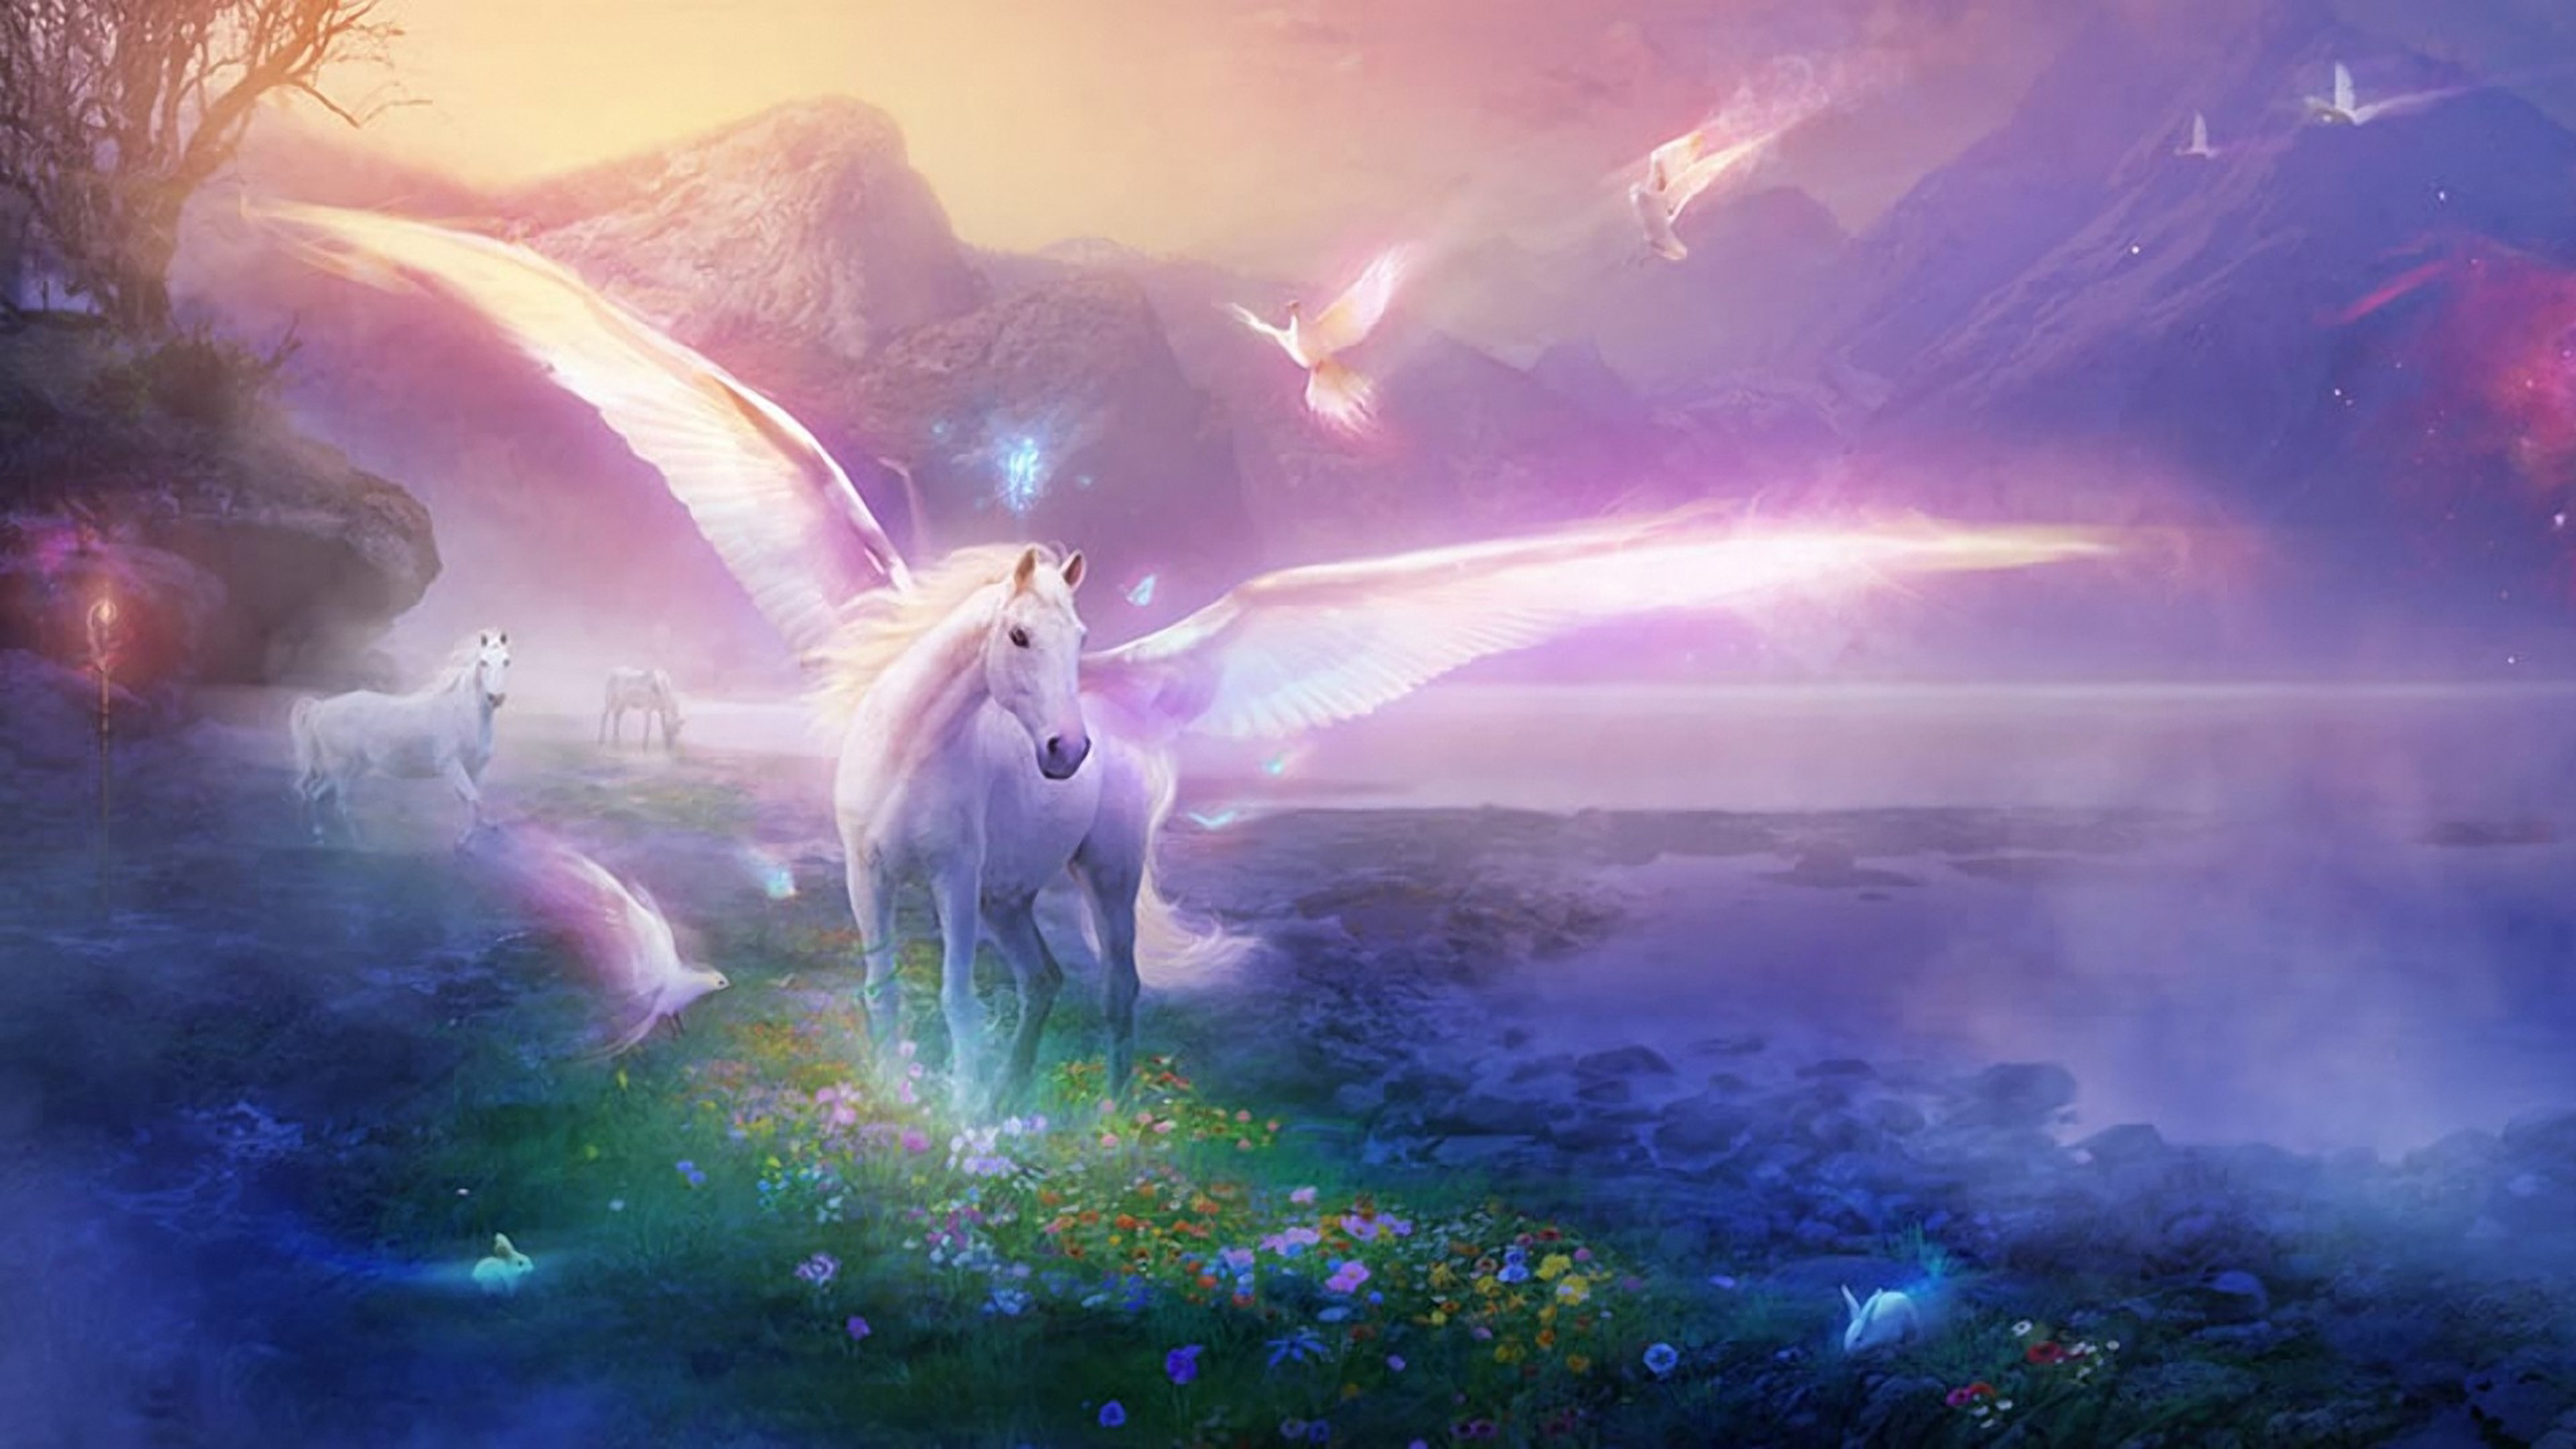 White Winged Unicorn With Open And White Pigeons In The World Of Fairy